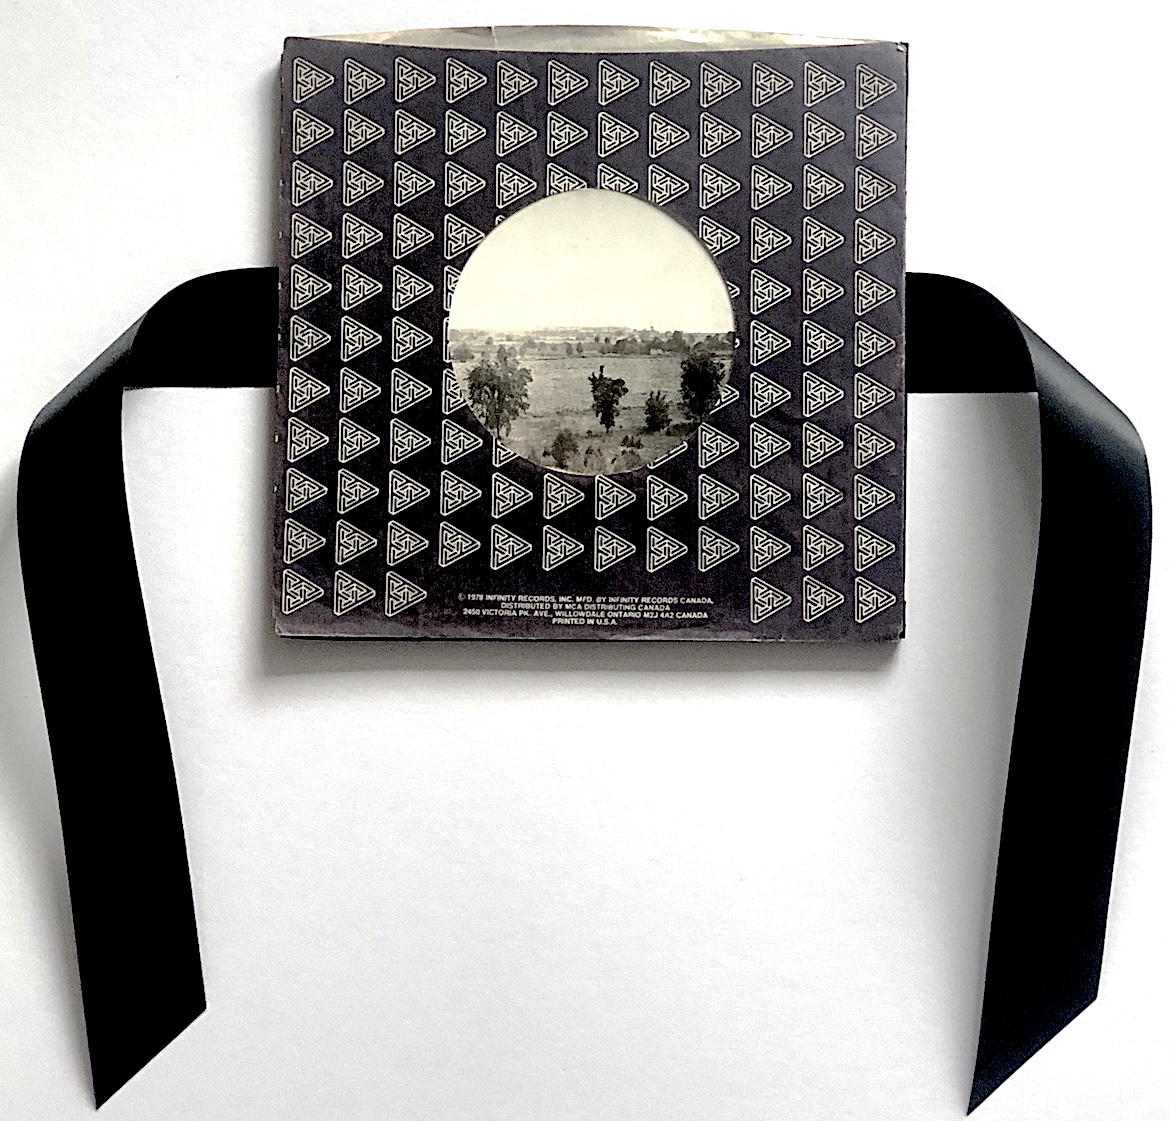 Artwork by Schem Rogerson Bader, A Storm is Coming From Paradise, 2024, assemblage, 10 x 10 inches. Black and white photograph in a record envelope, with black ribbons on either side, on a white background.